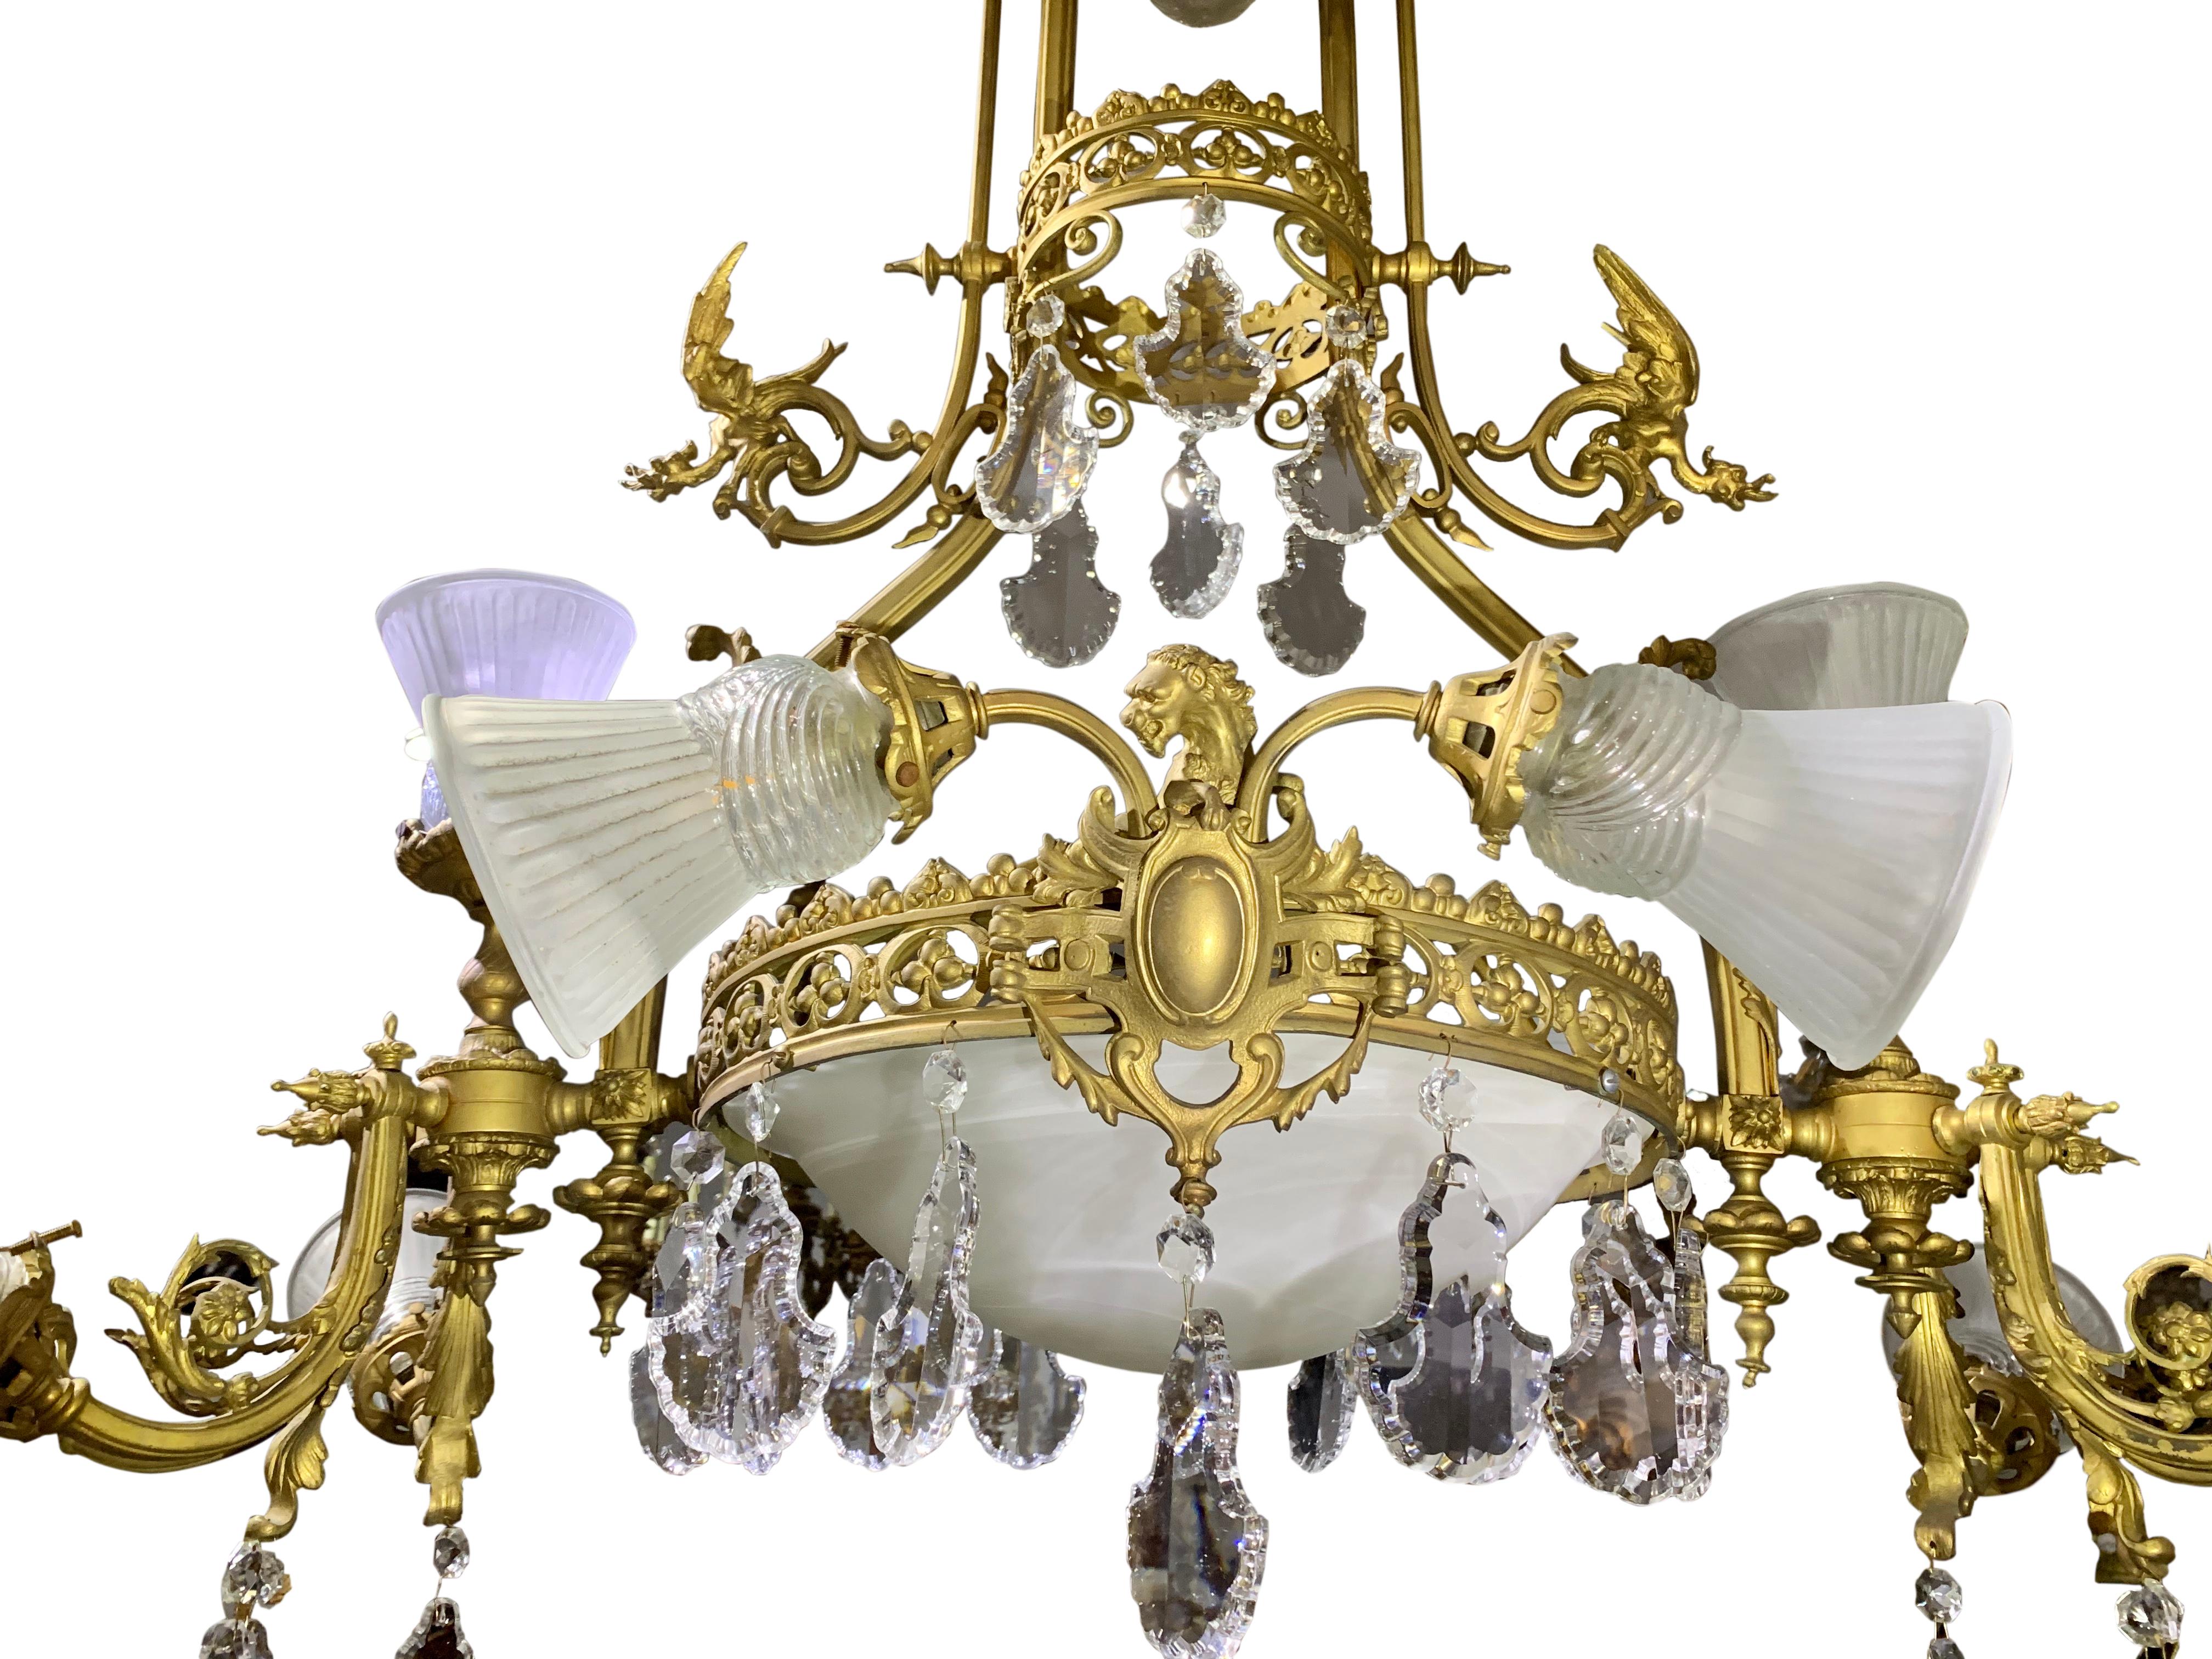 Napoleon III 19th Century French Gilt Bronze and Crystal Twelve-Light Chandelier with dragons For Sale